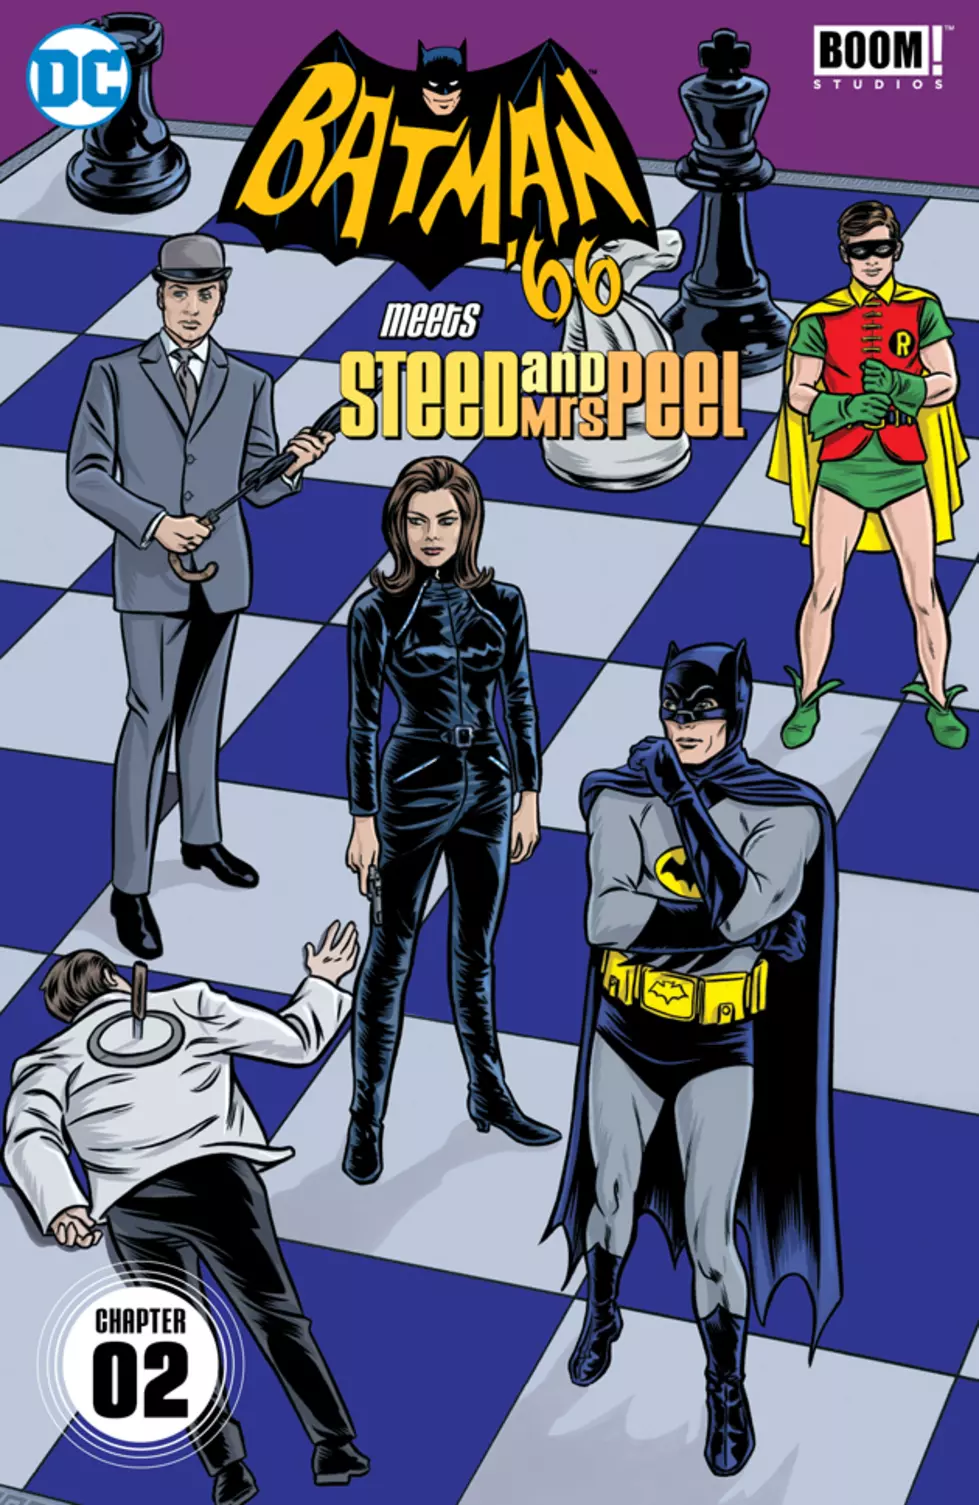 Steed And Peel Hit Gotham City In &#8216;Batman &#8217;66 Meets Steed And Mrs. Peel&#8217; Chapter 2 [Preview]